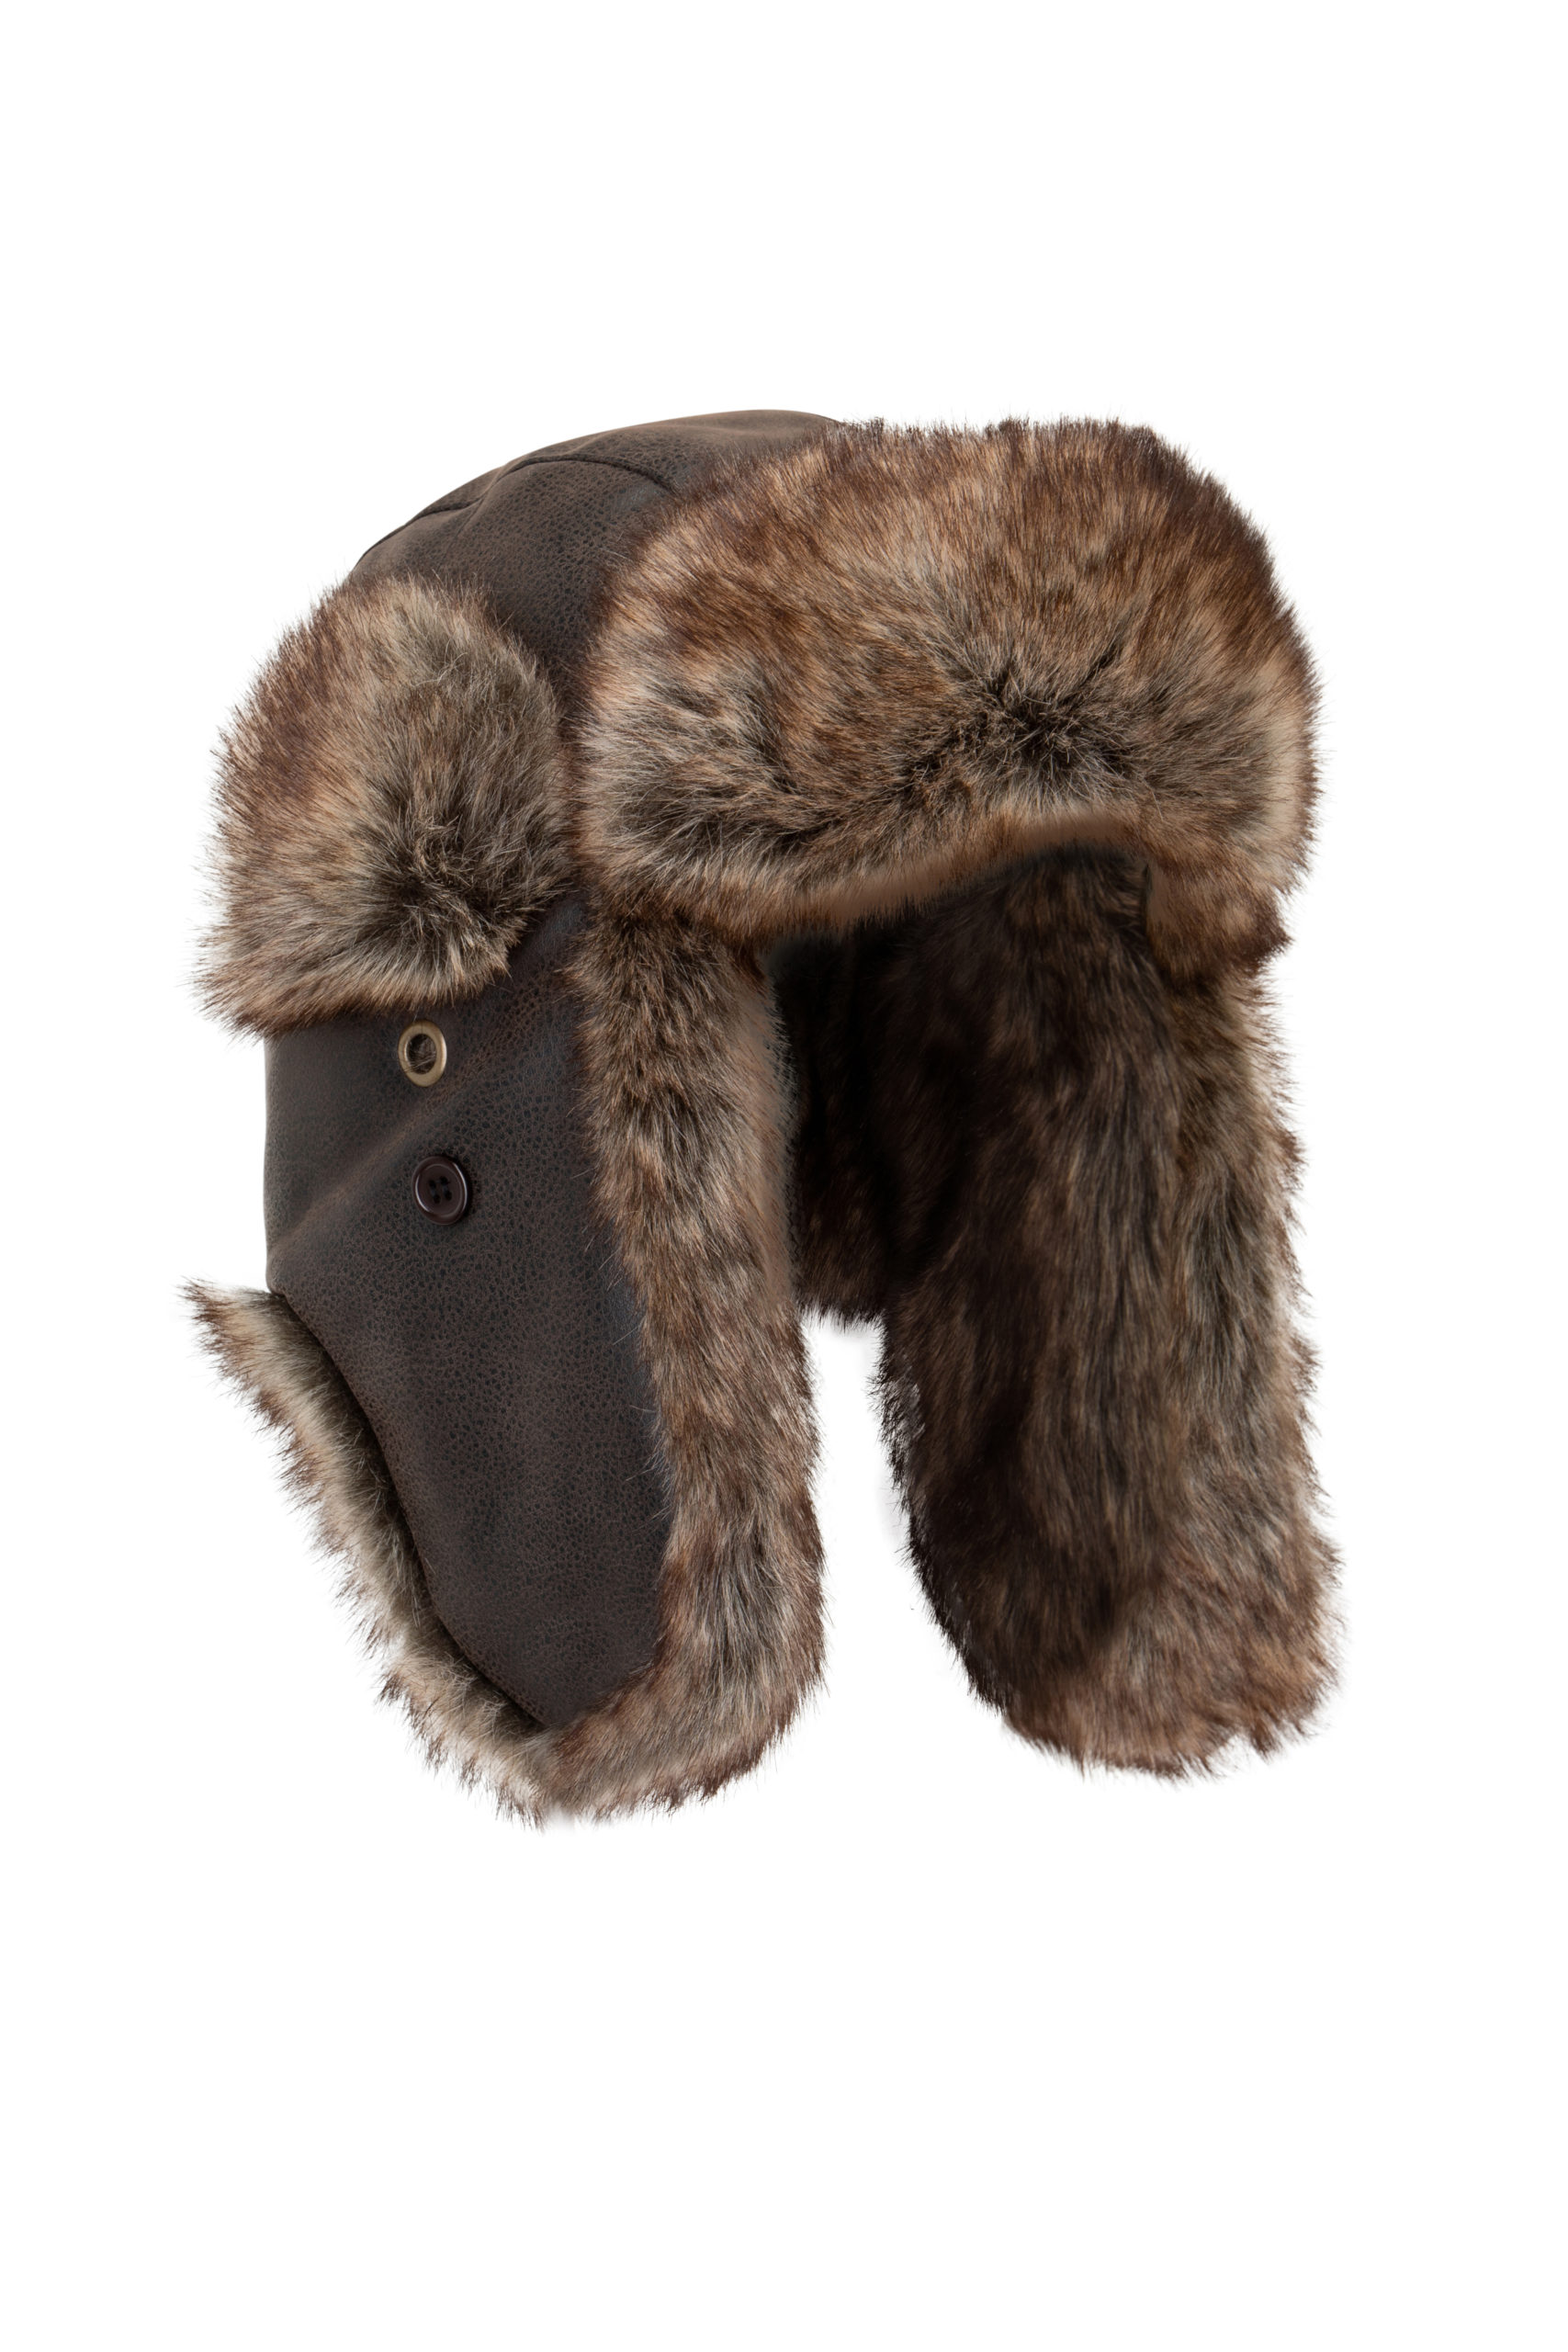 BROWN COUNTRY TWEED FAUX FUR AVIATOR TRAPPER FYLING SHOOTING HUNTING FISHING HAT 